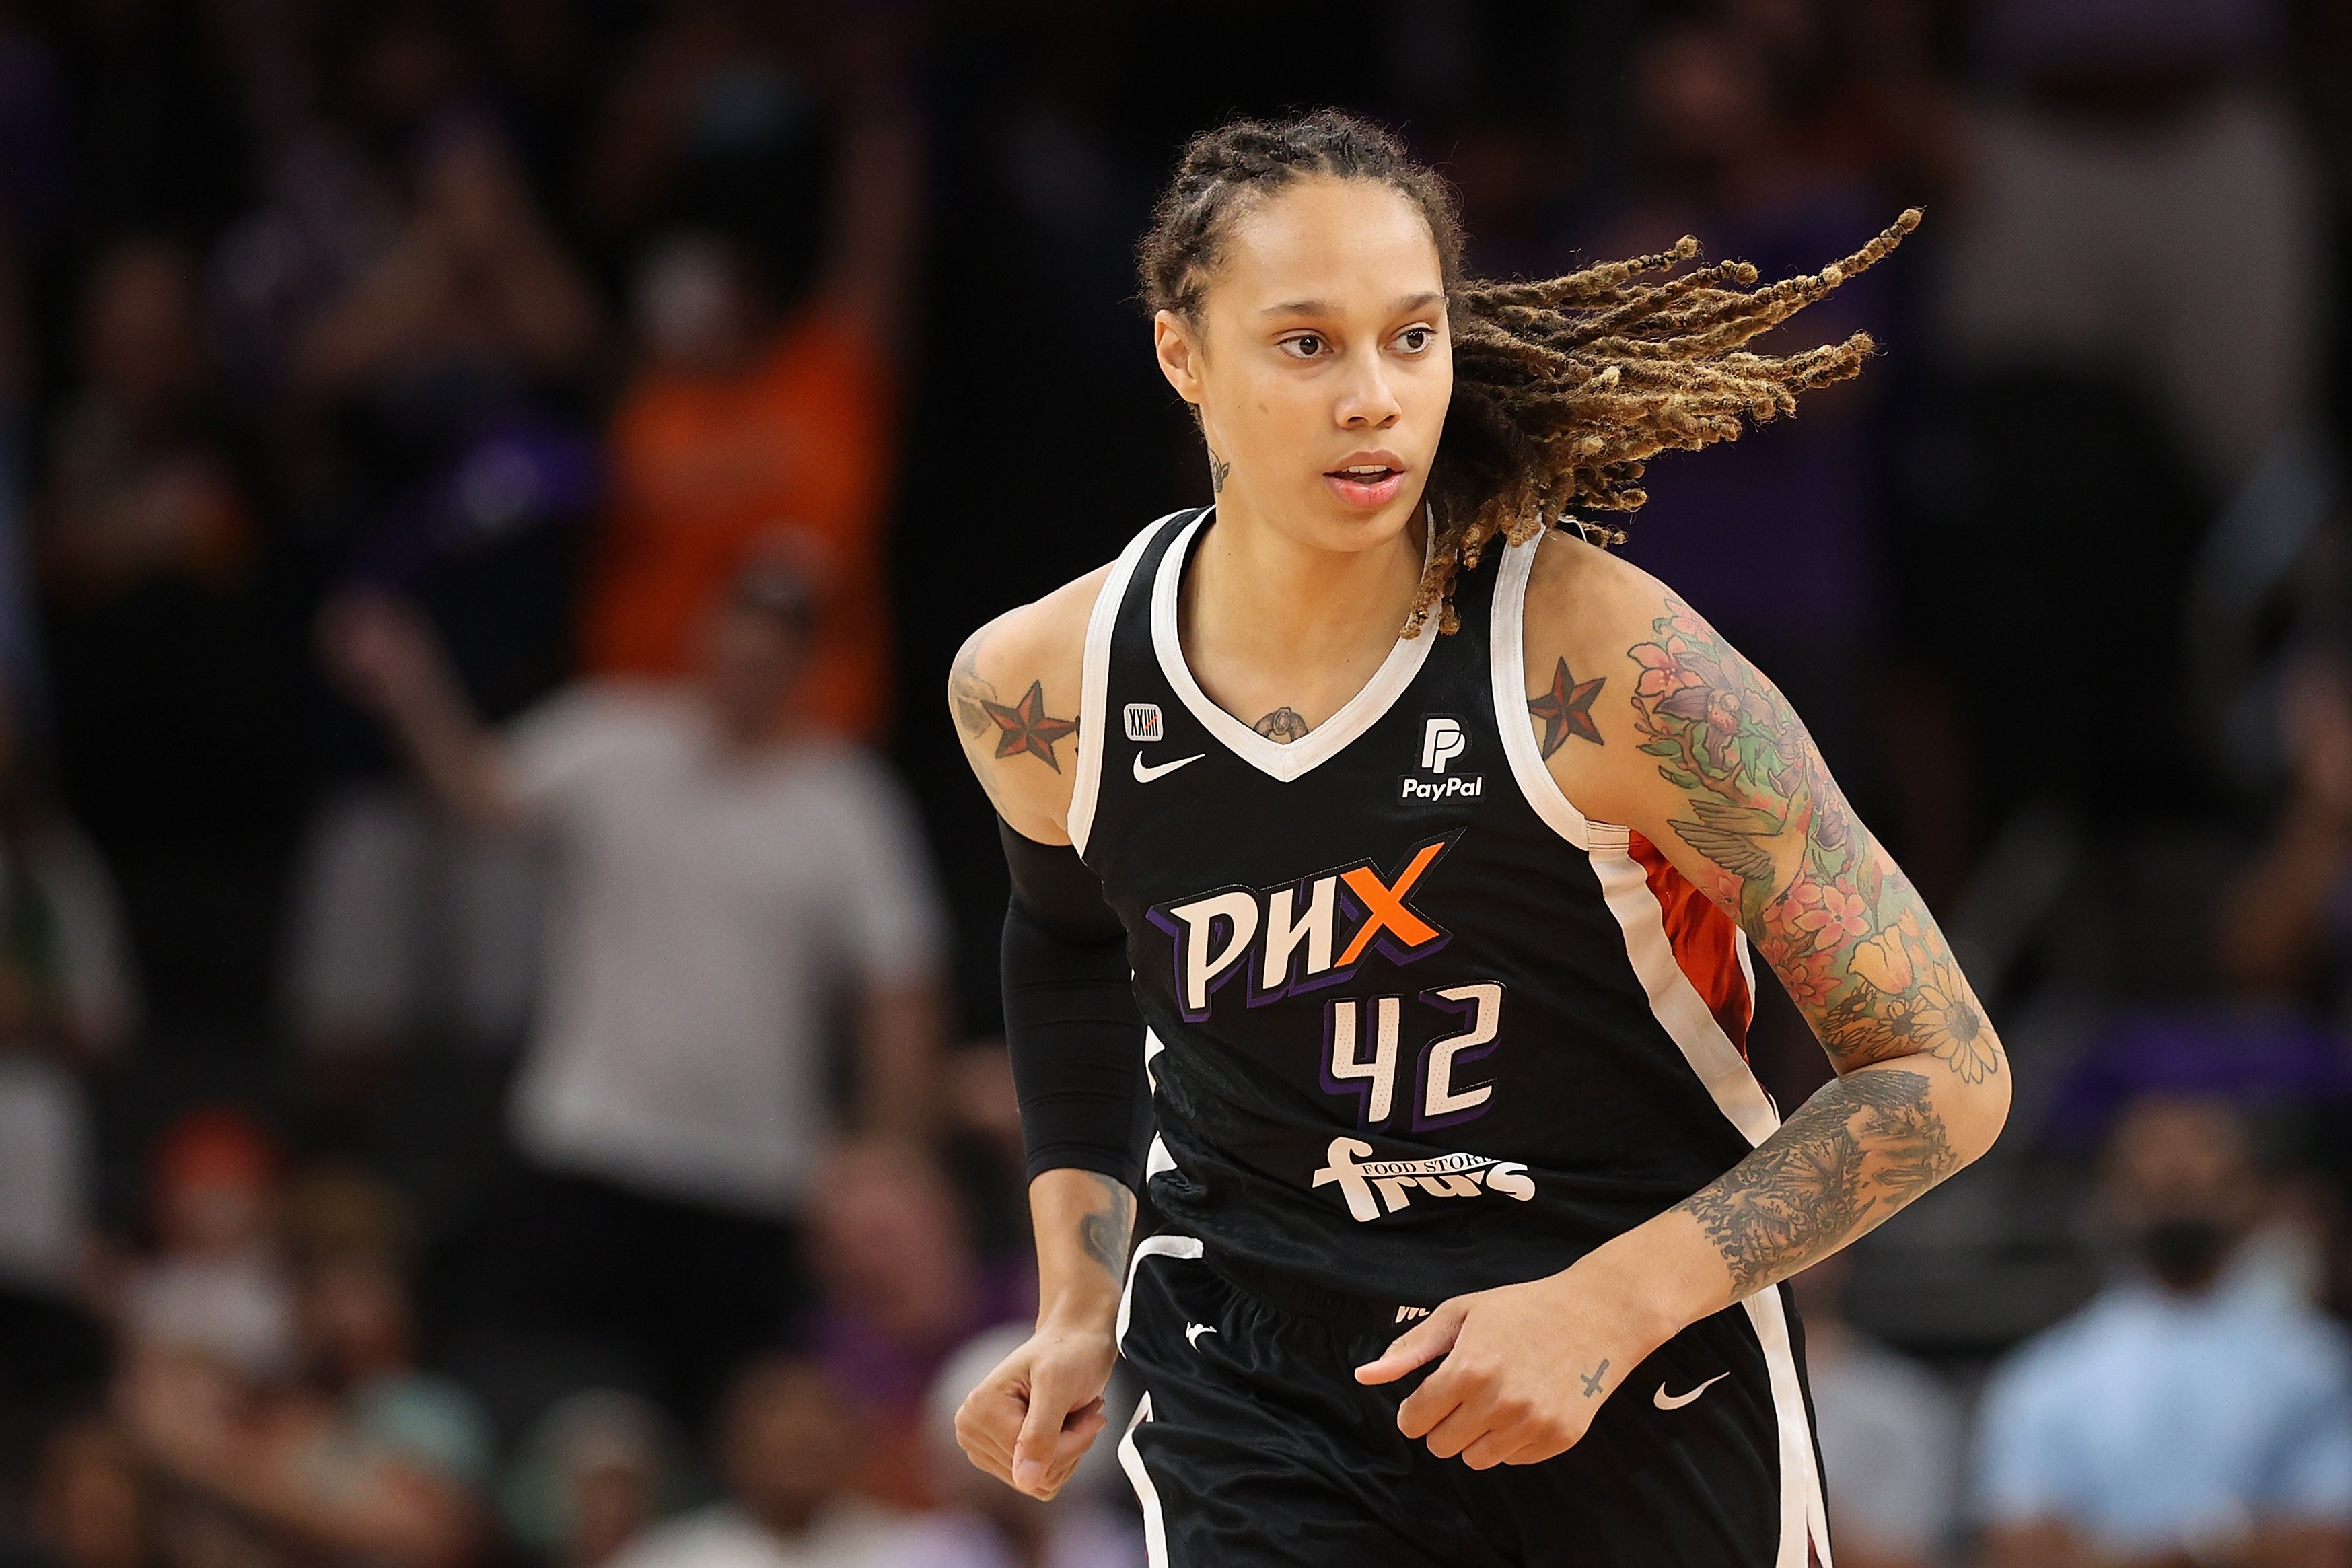 Brittney Griner at the 2021 WNBA semifinals on October 6, 2021, in Phoenix | Source: Getty Images